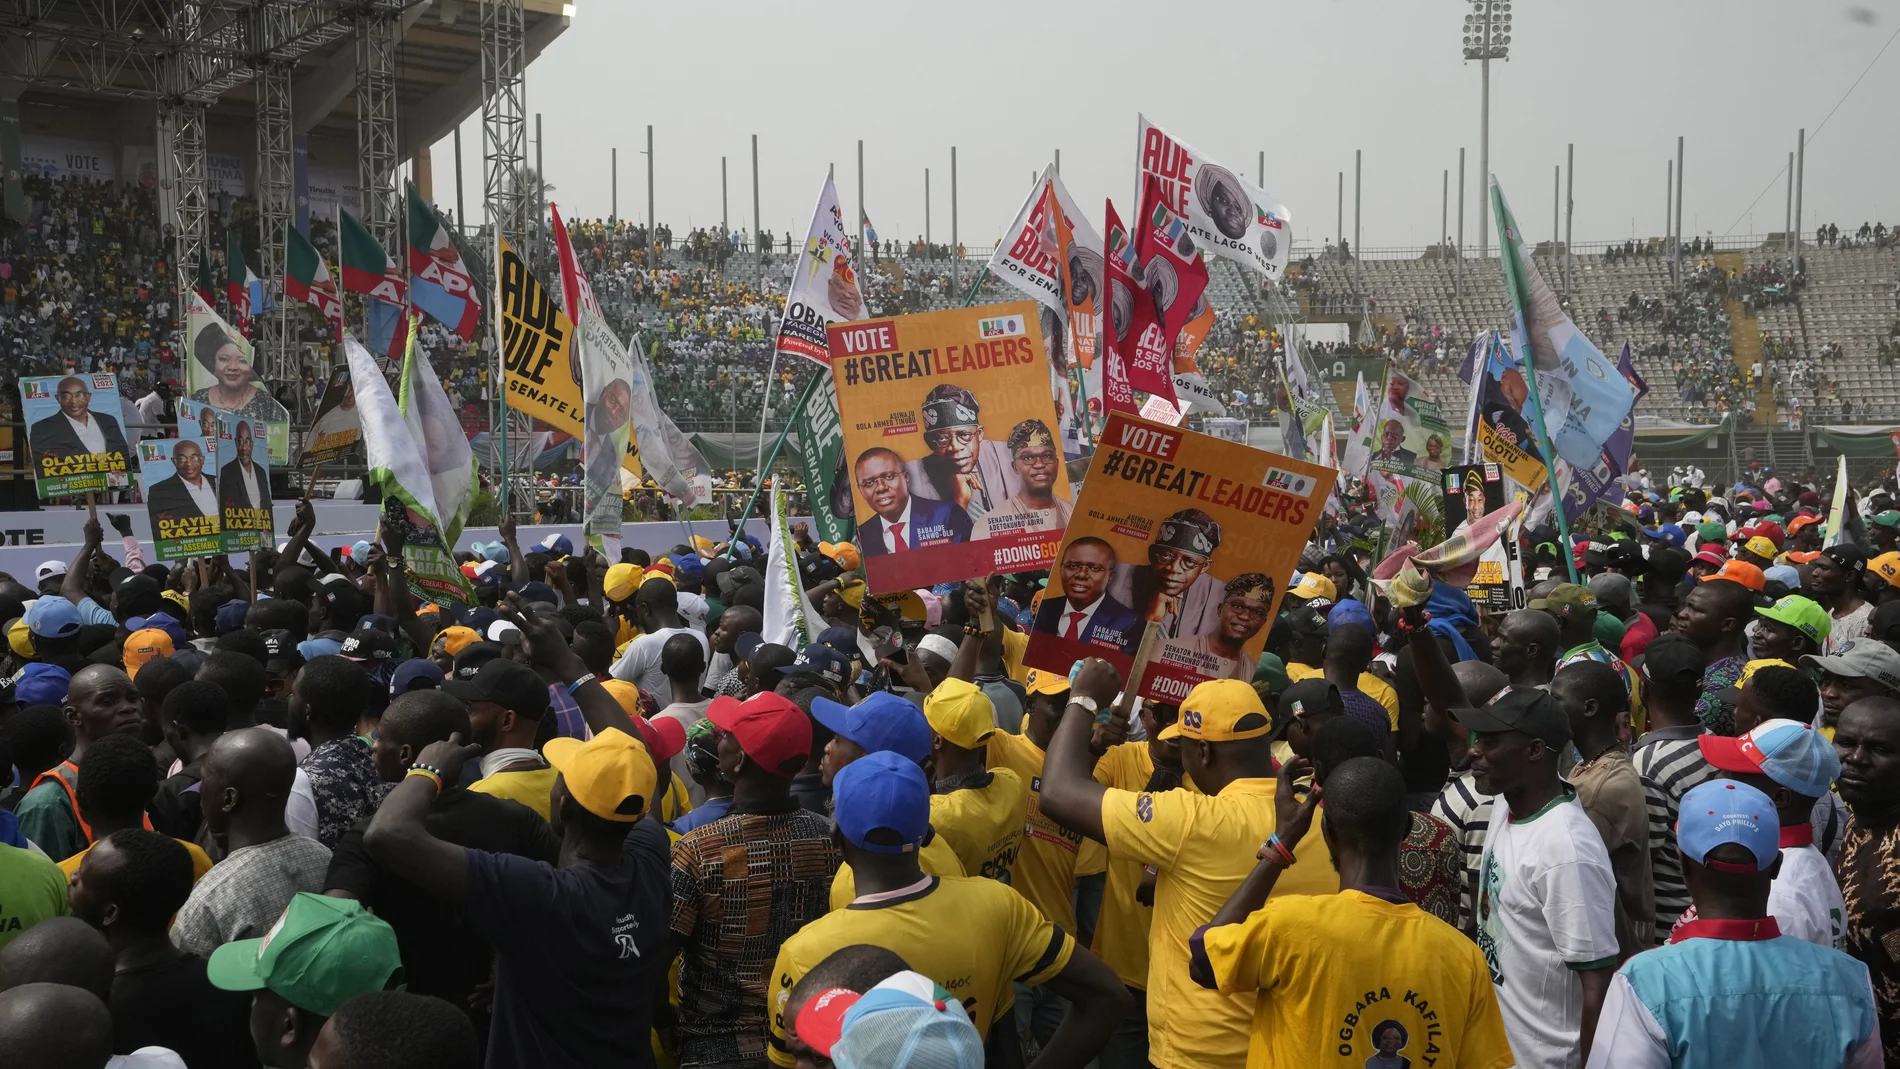 Supporters of Bola Ahmed Tinubu, the presidential candidate of the All Progressives Congress, Nigeria ruling party, attend an election campaign rally at the Teslim Balogun Stadium in Lagos Nigeria, Tuesday, Feb. 21, 2023.